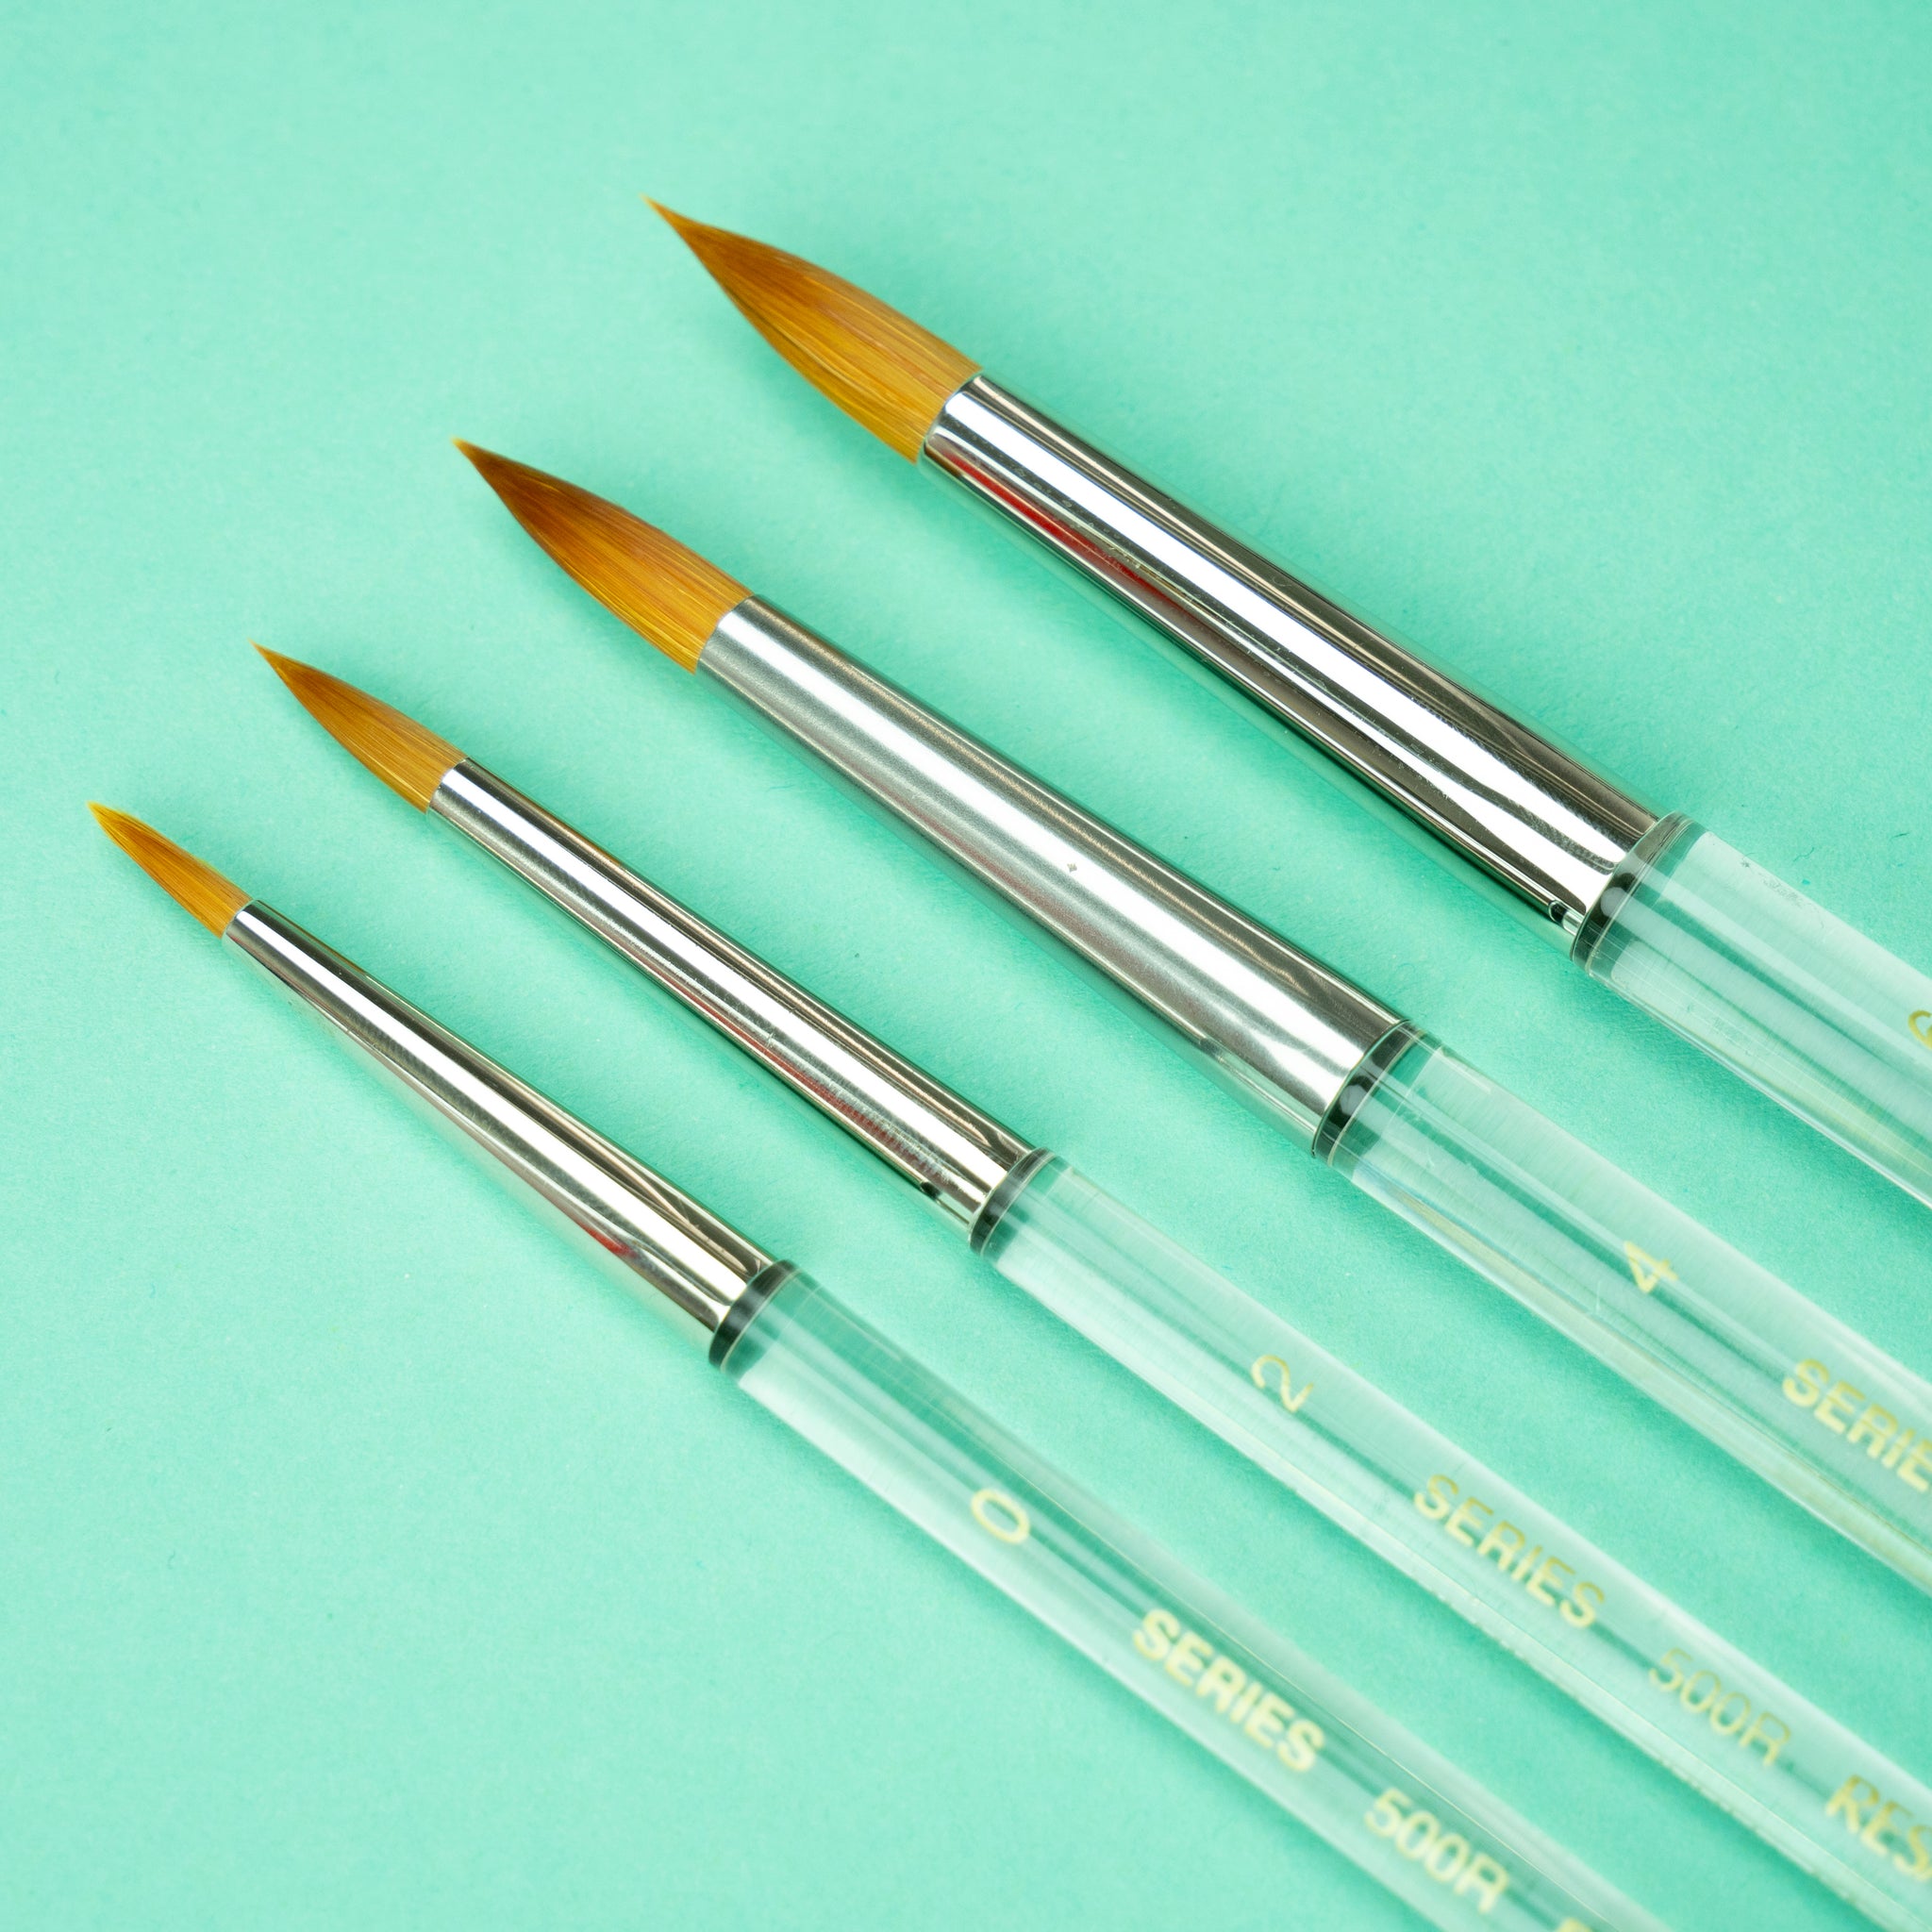 A photo of the four available brush sizes in a row on a light turquoise background, with the smallest size 0 on the left and the largest size 6 on the right. 